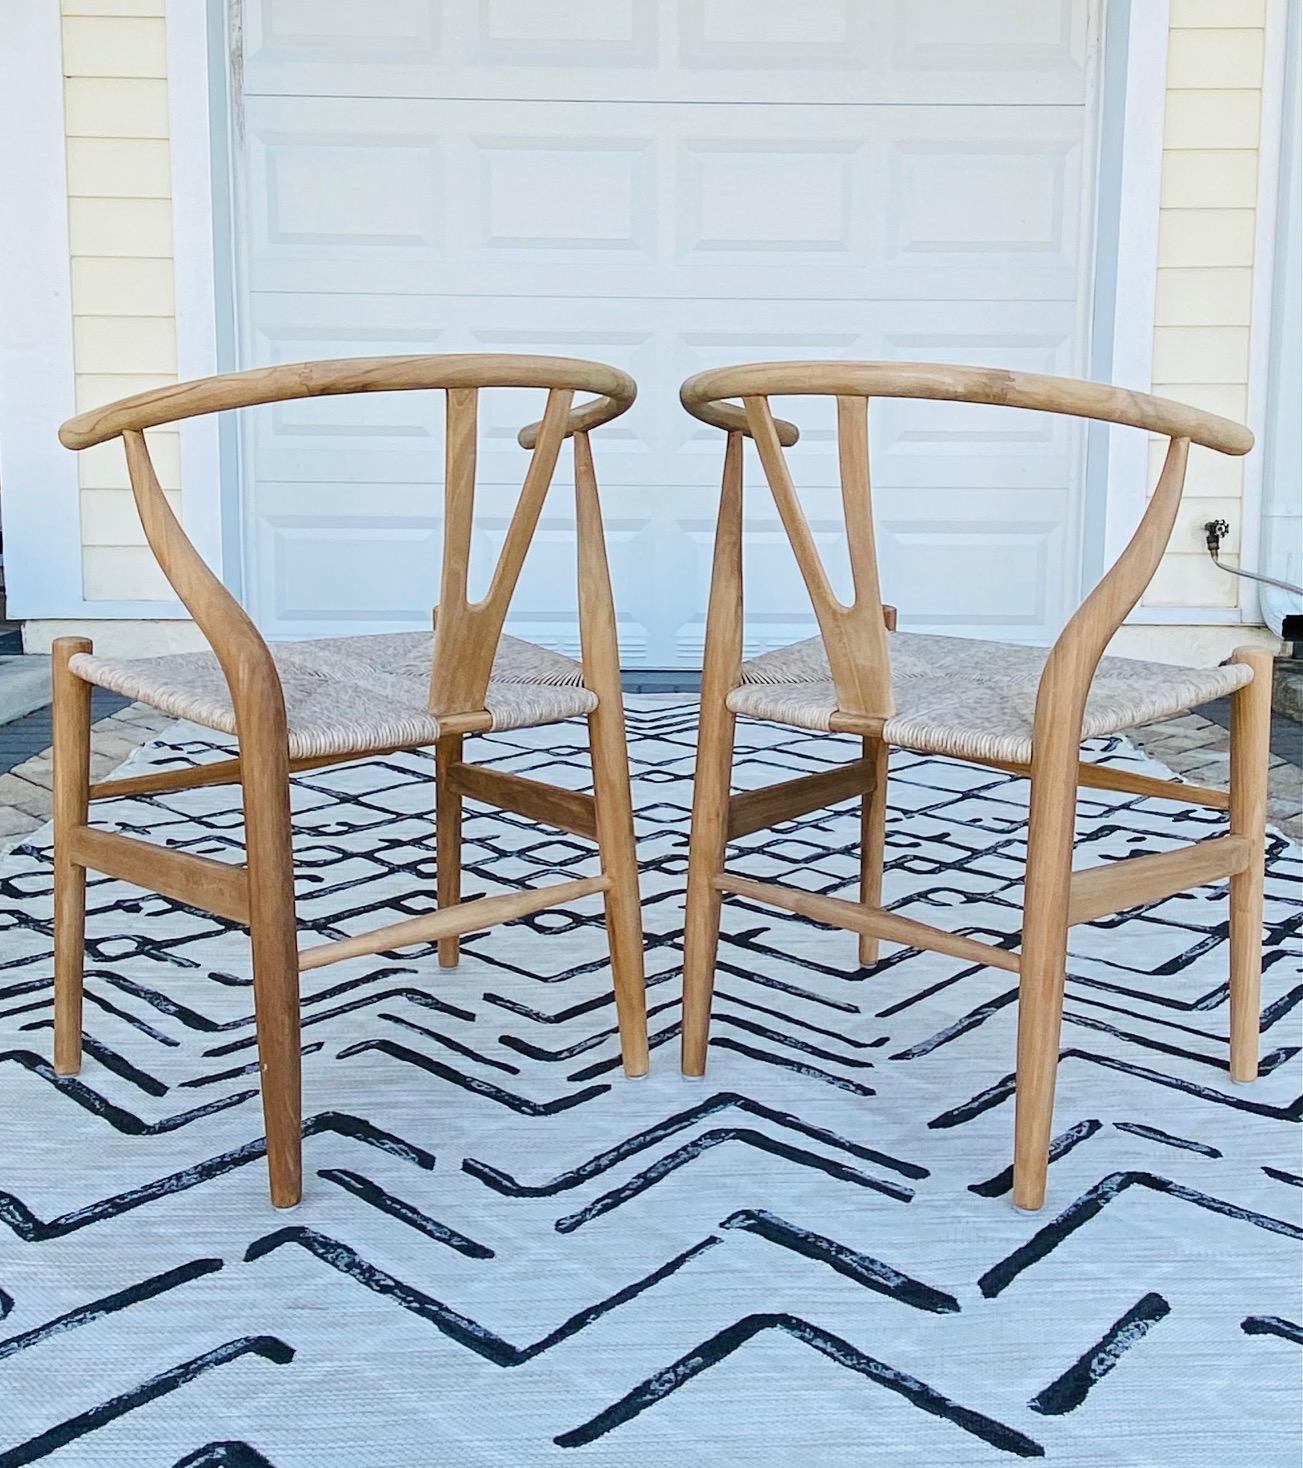 Hand-Crafted Pair of Vintage Danish Modern Chairs in Natural Teak Wood with Handwoven Seats